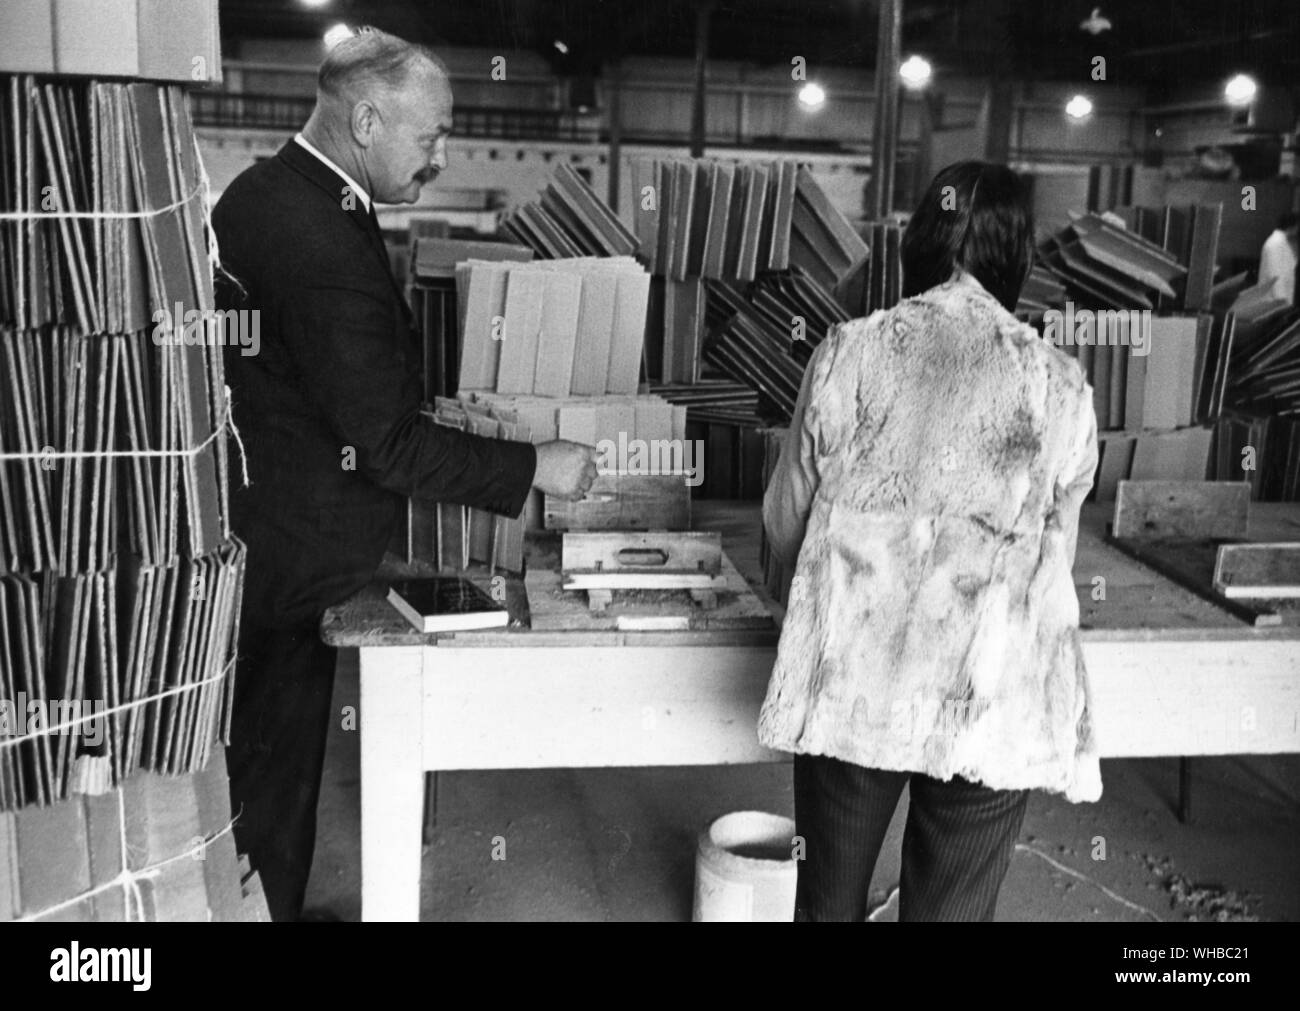 Drug centre at St. John's Hospital , Lincoln - picture showa a doctor looking on as a 17 year old drug addict makes cardboard boxes in the rehabitation section of the hospital.. Stock Photo